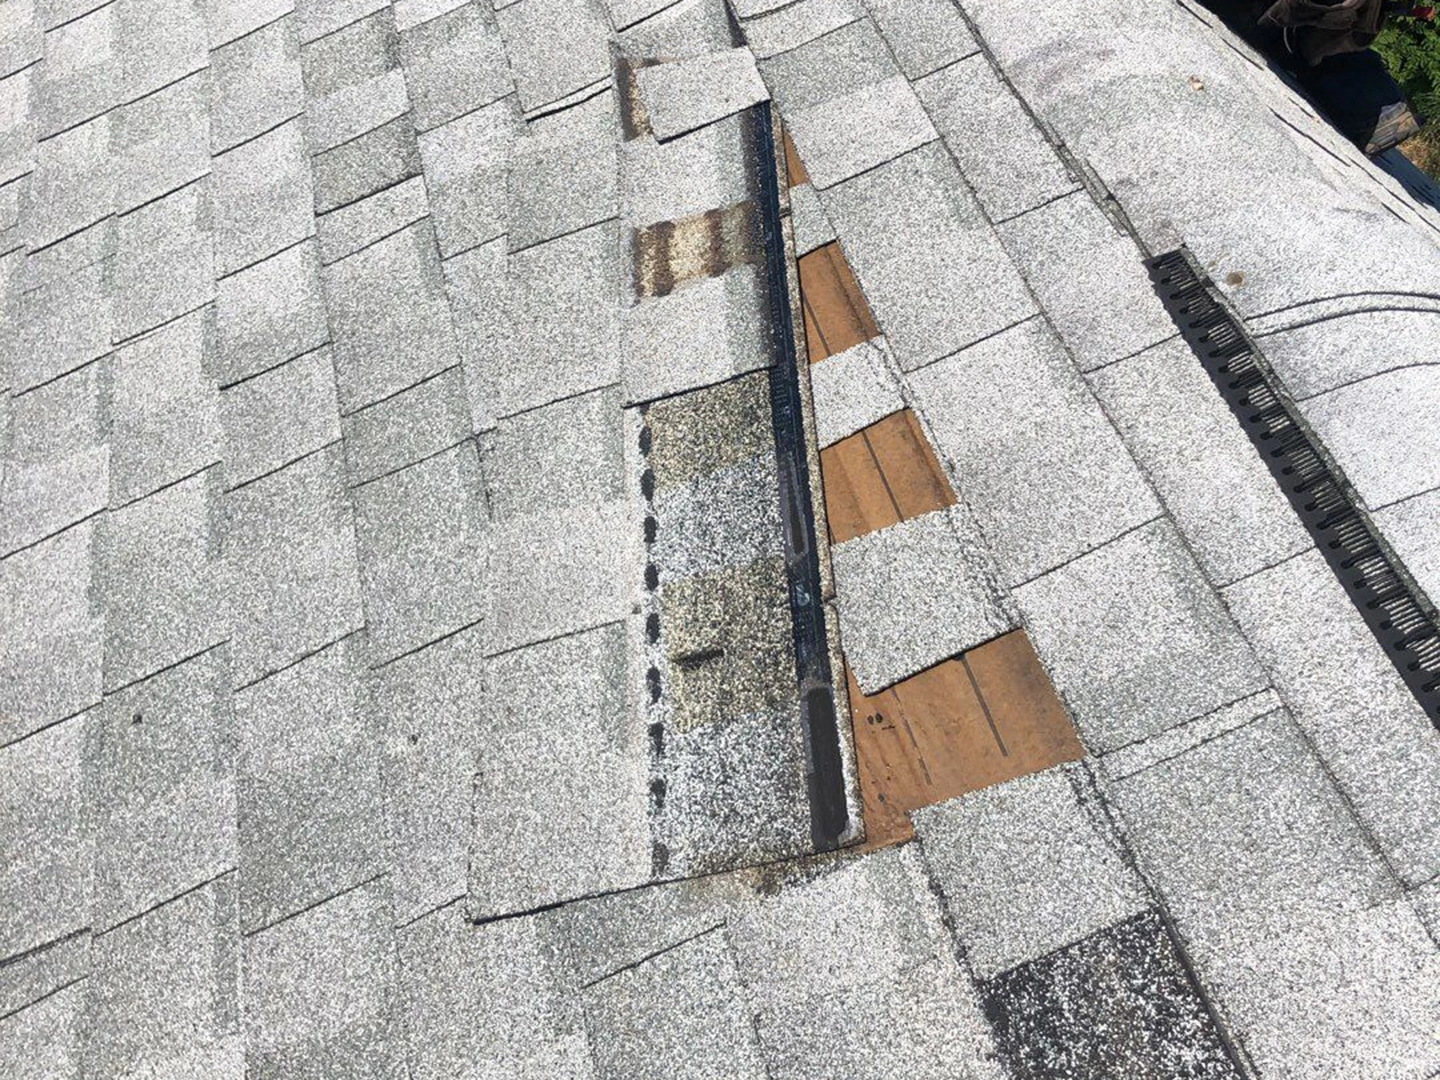 Wind Damage Found on a Residential Home in Weaverville, North Carolina. Inspection done by Quantum Roofing.